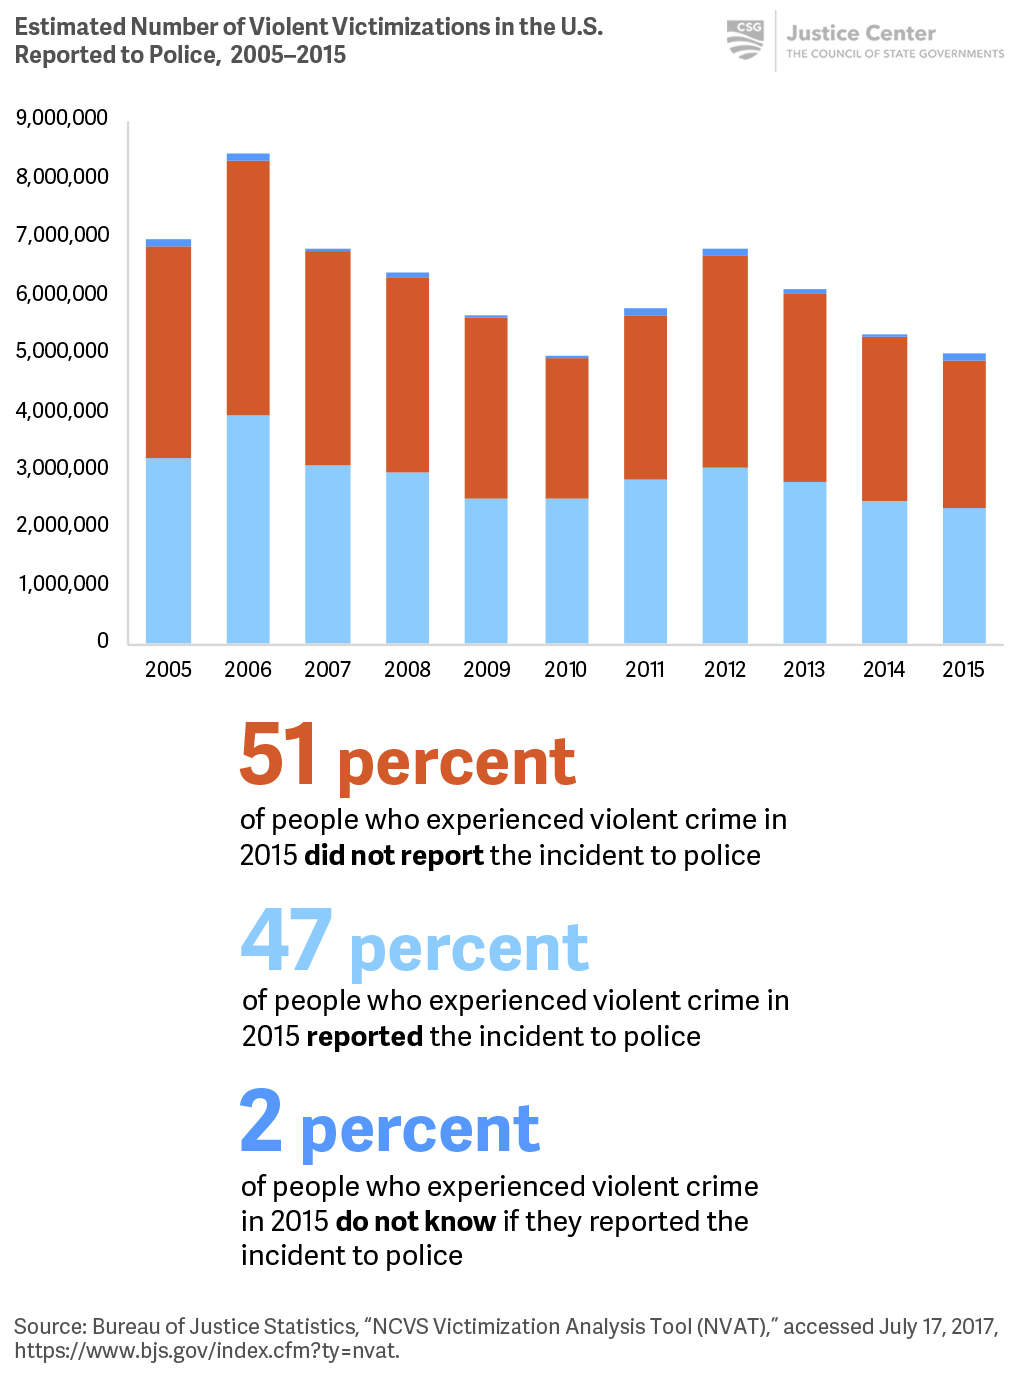 More than half of people who experience violent crime do not report these incidents to police.